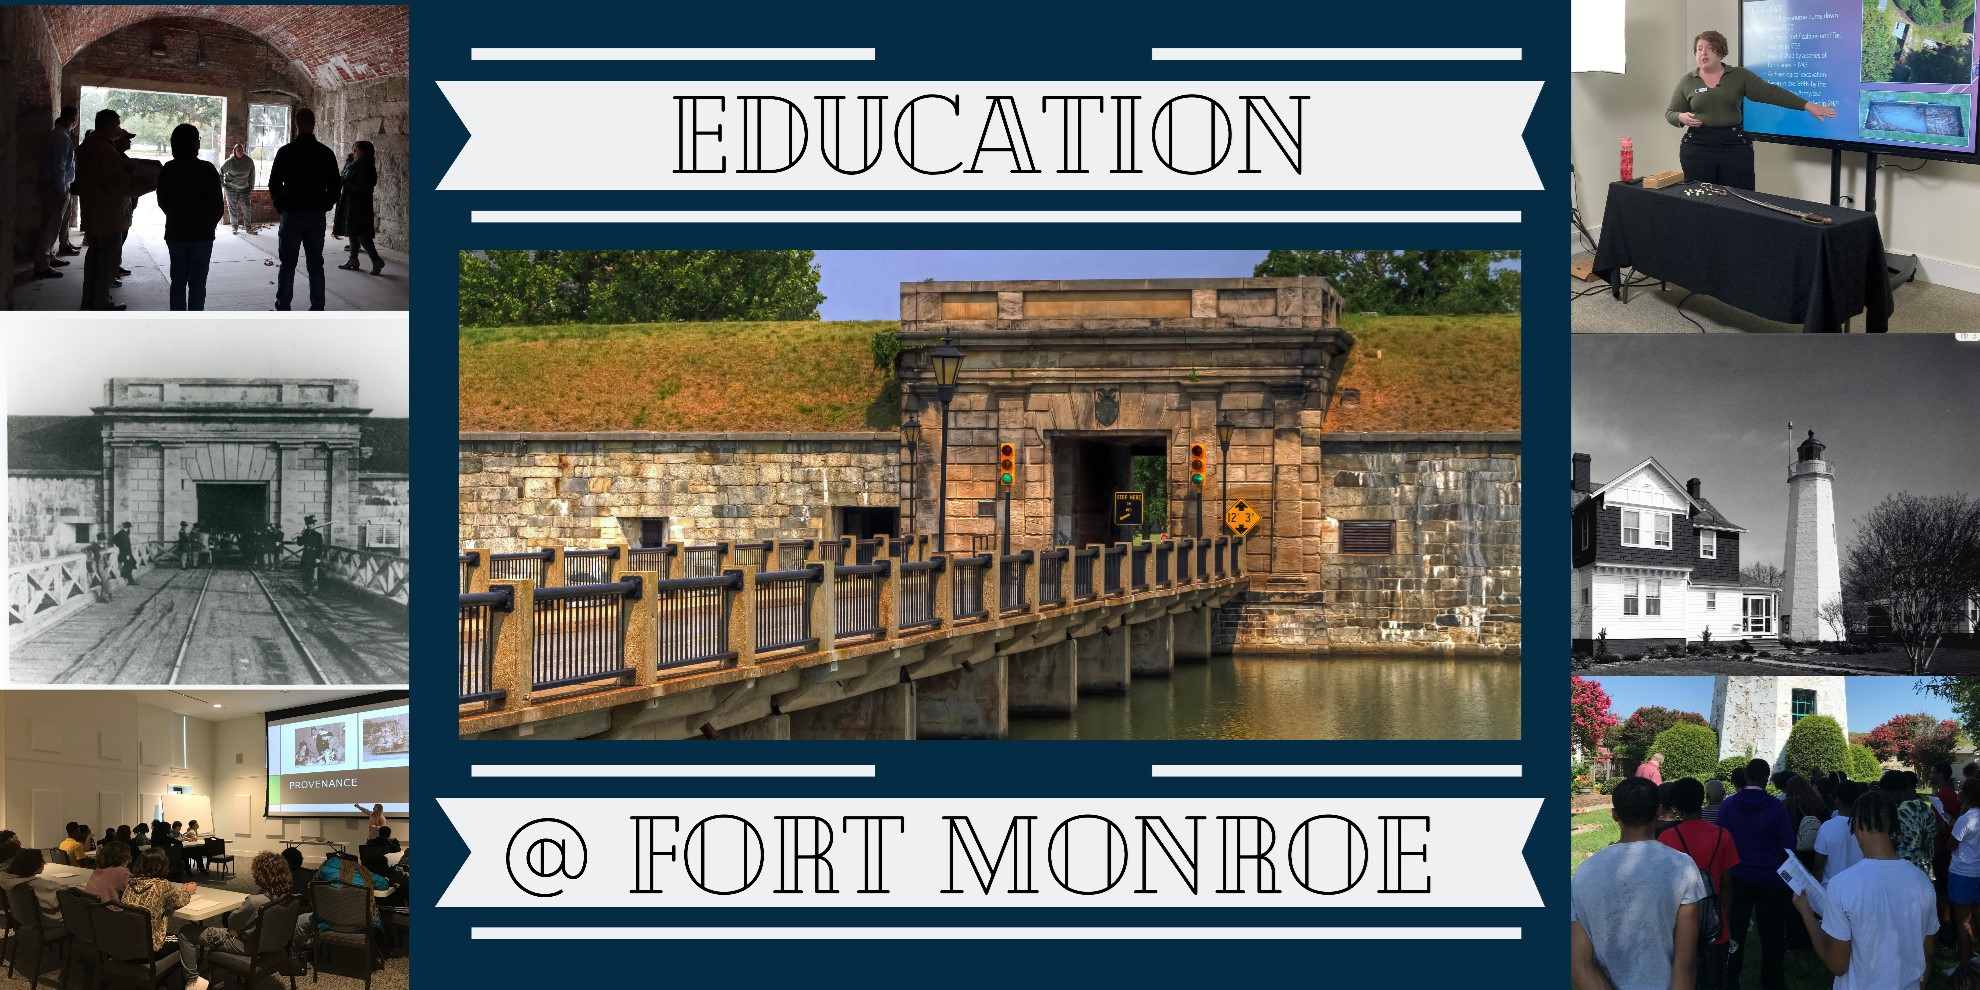 Education at Fort Monroe